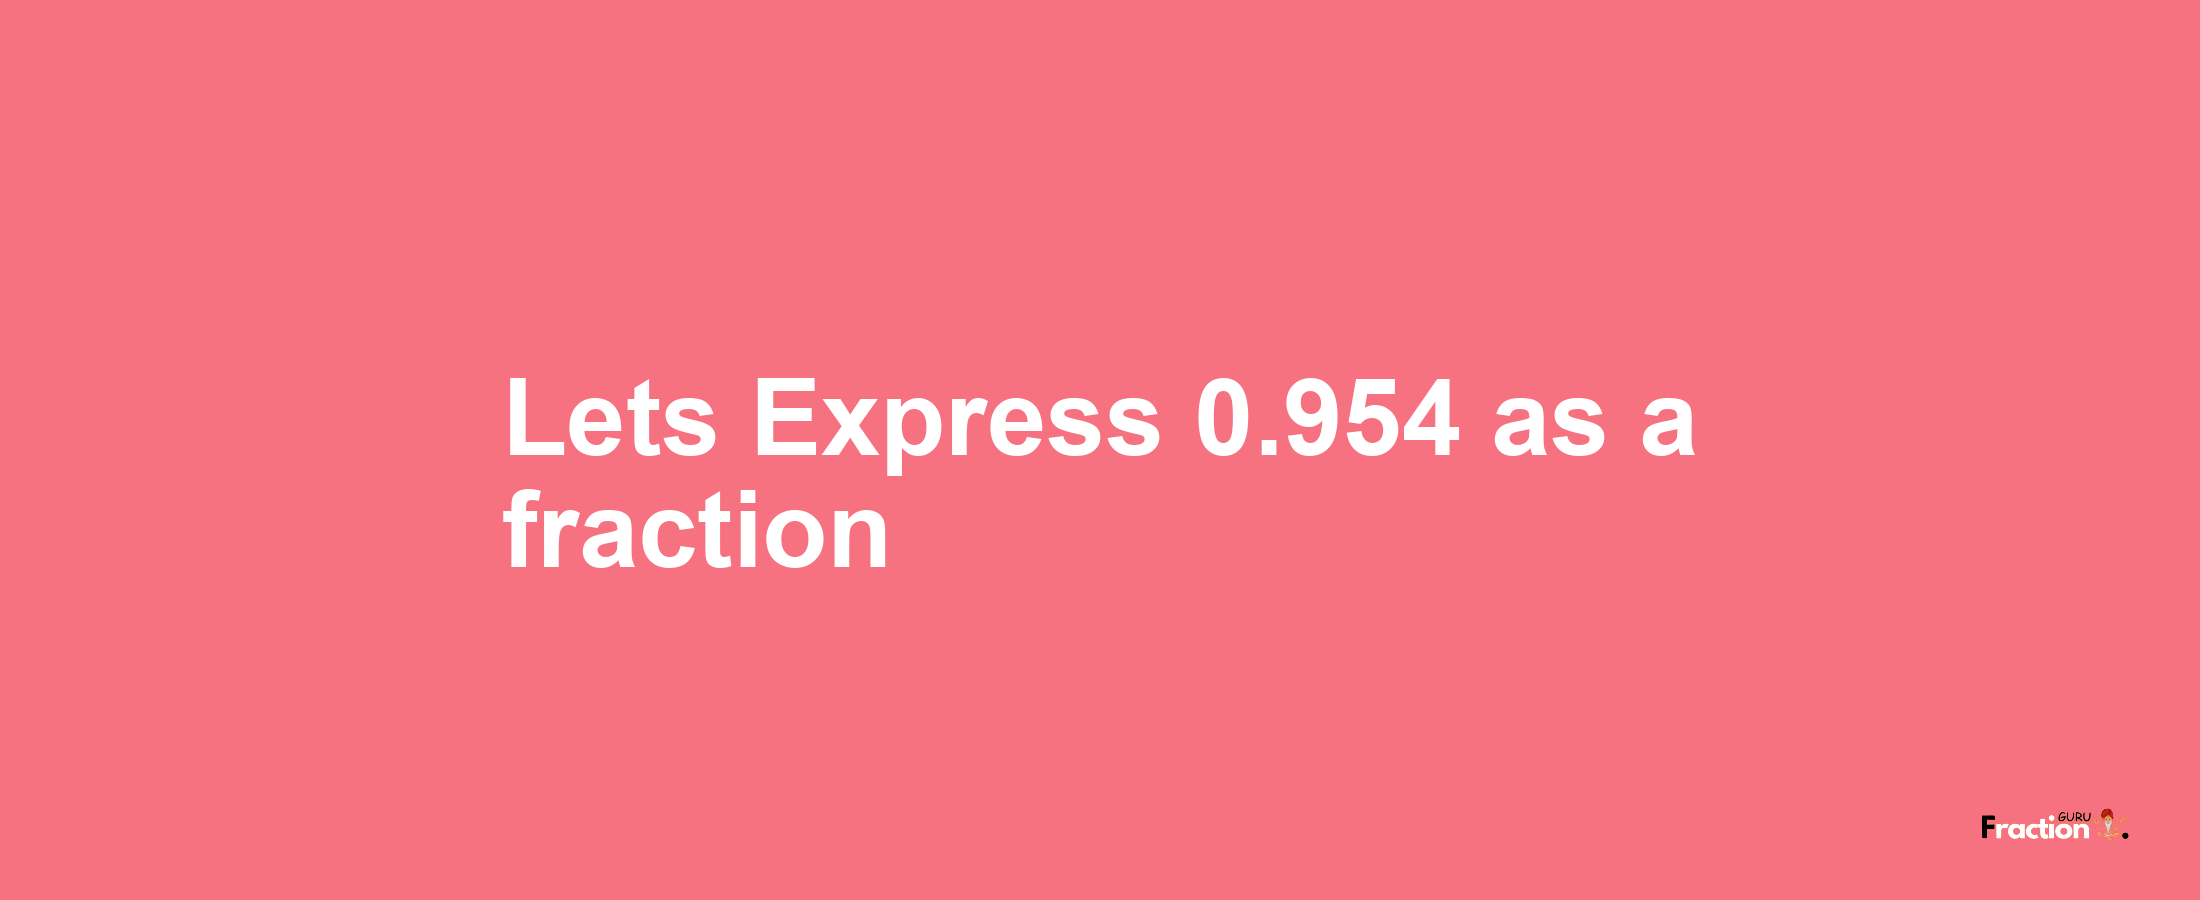 Lets Express 0.954 as afraction